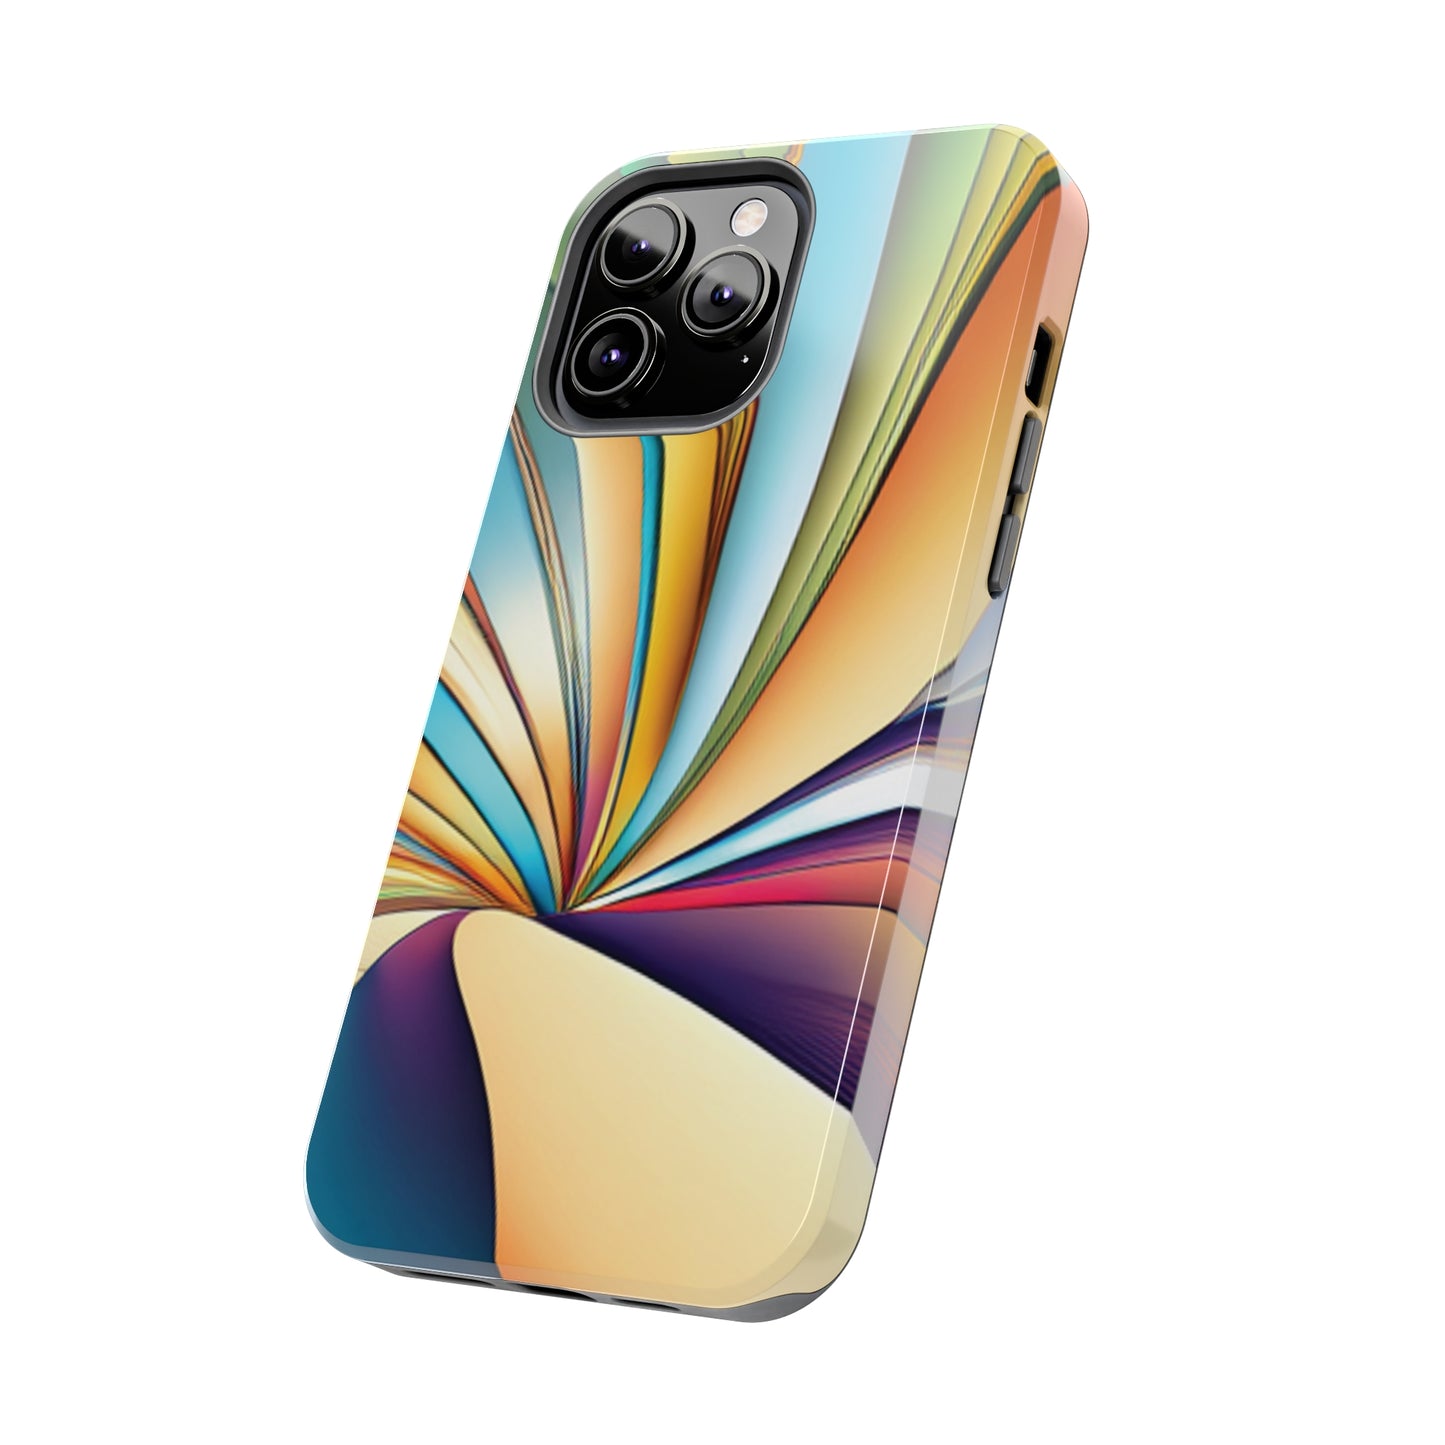 Strong Apple iPhone Case Ft. Spacetime Fabric